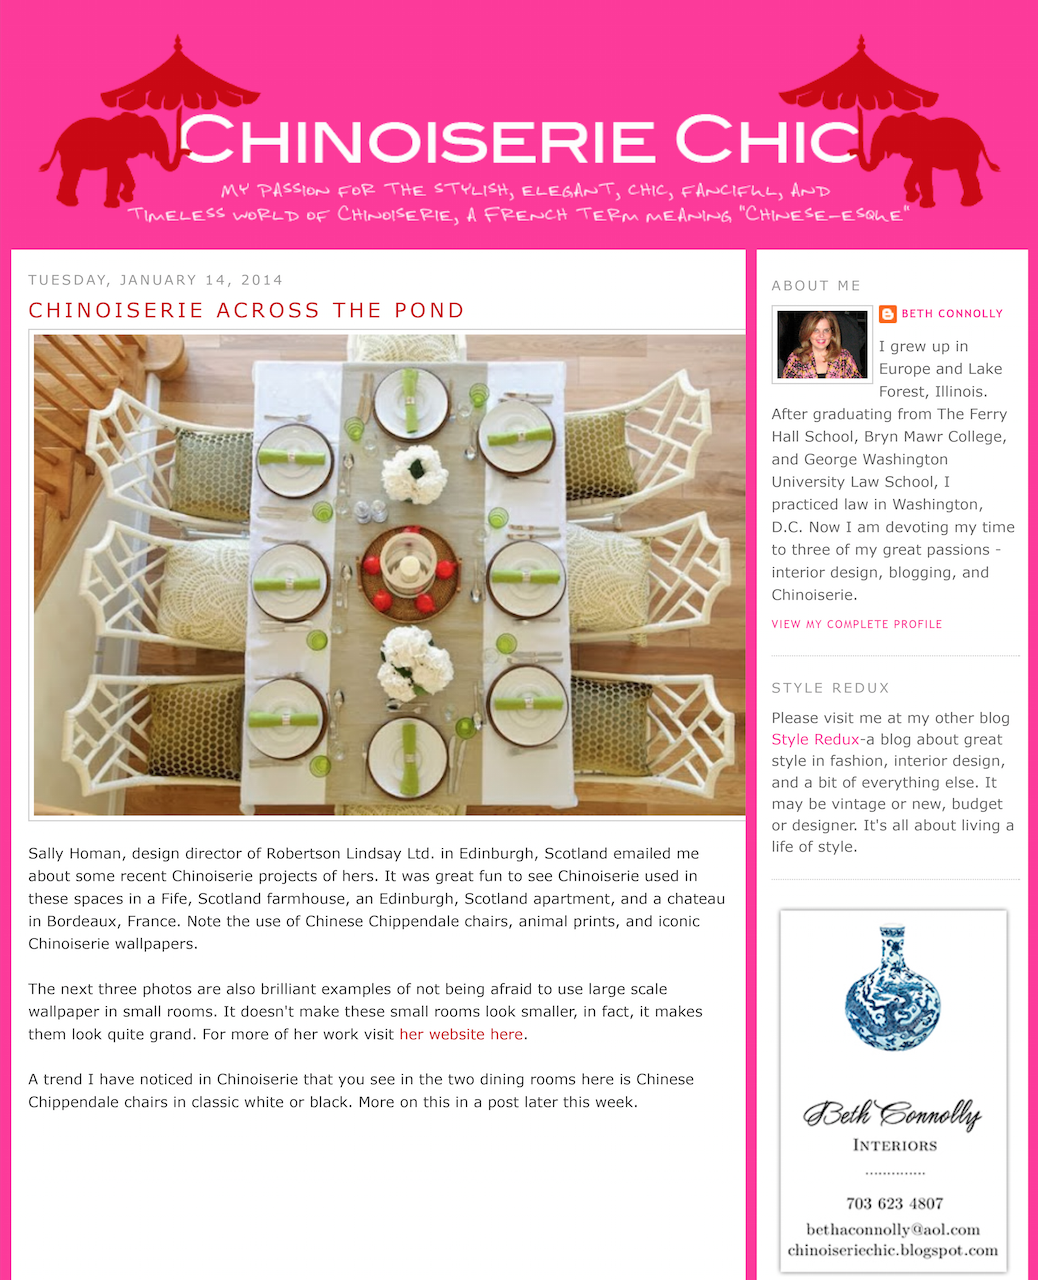 Robertson Lindsay featured on the US blog Chinoiserie Chic